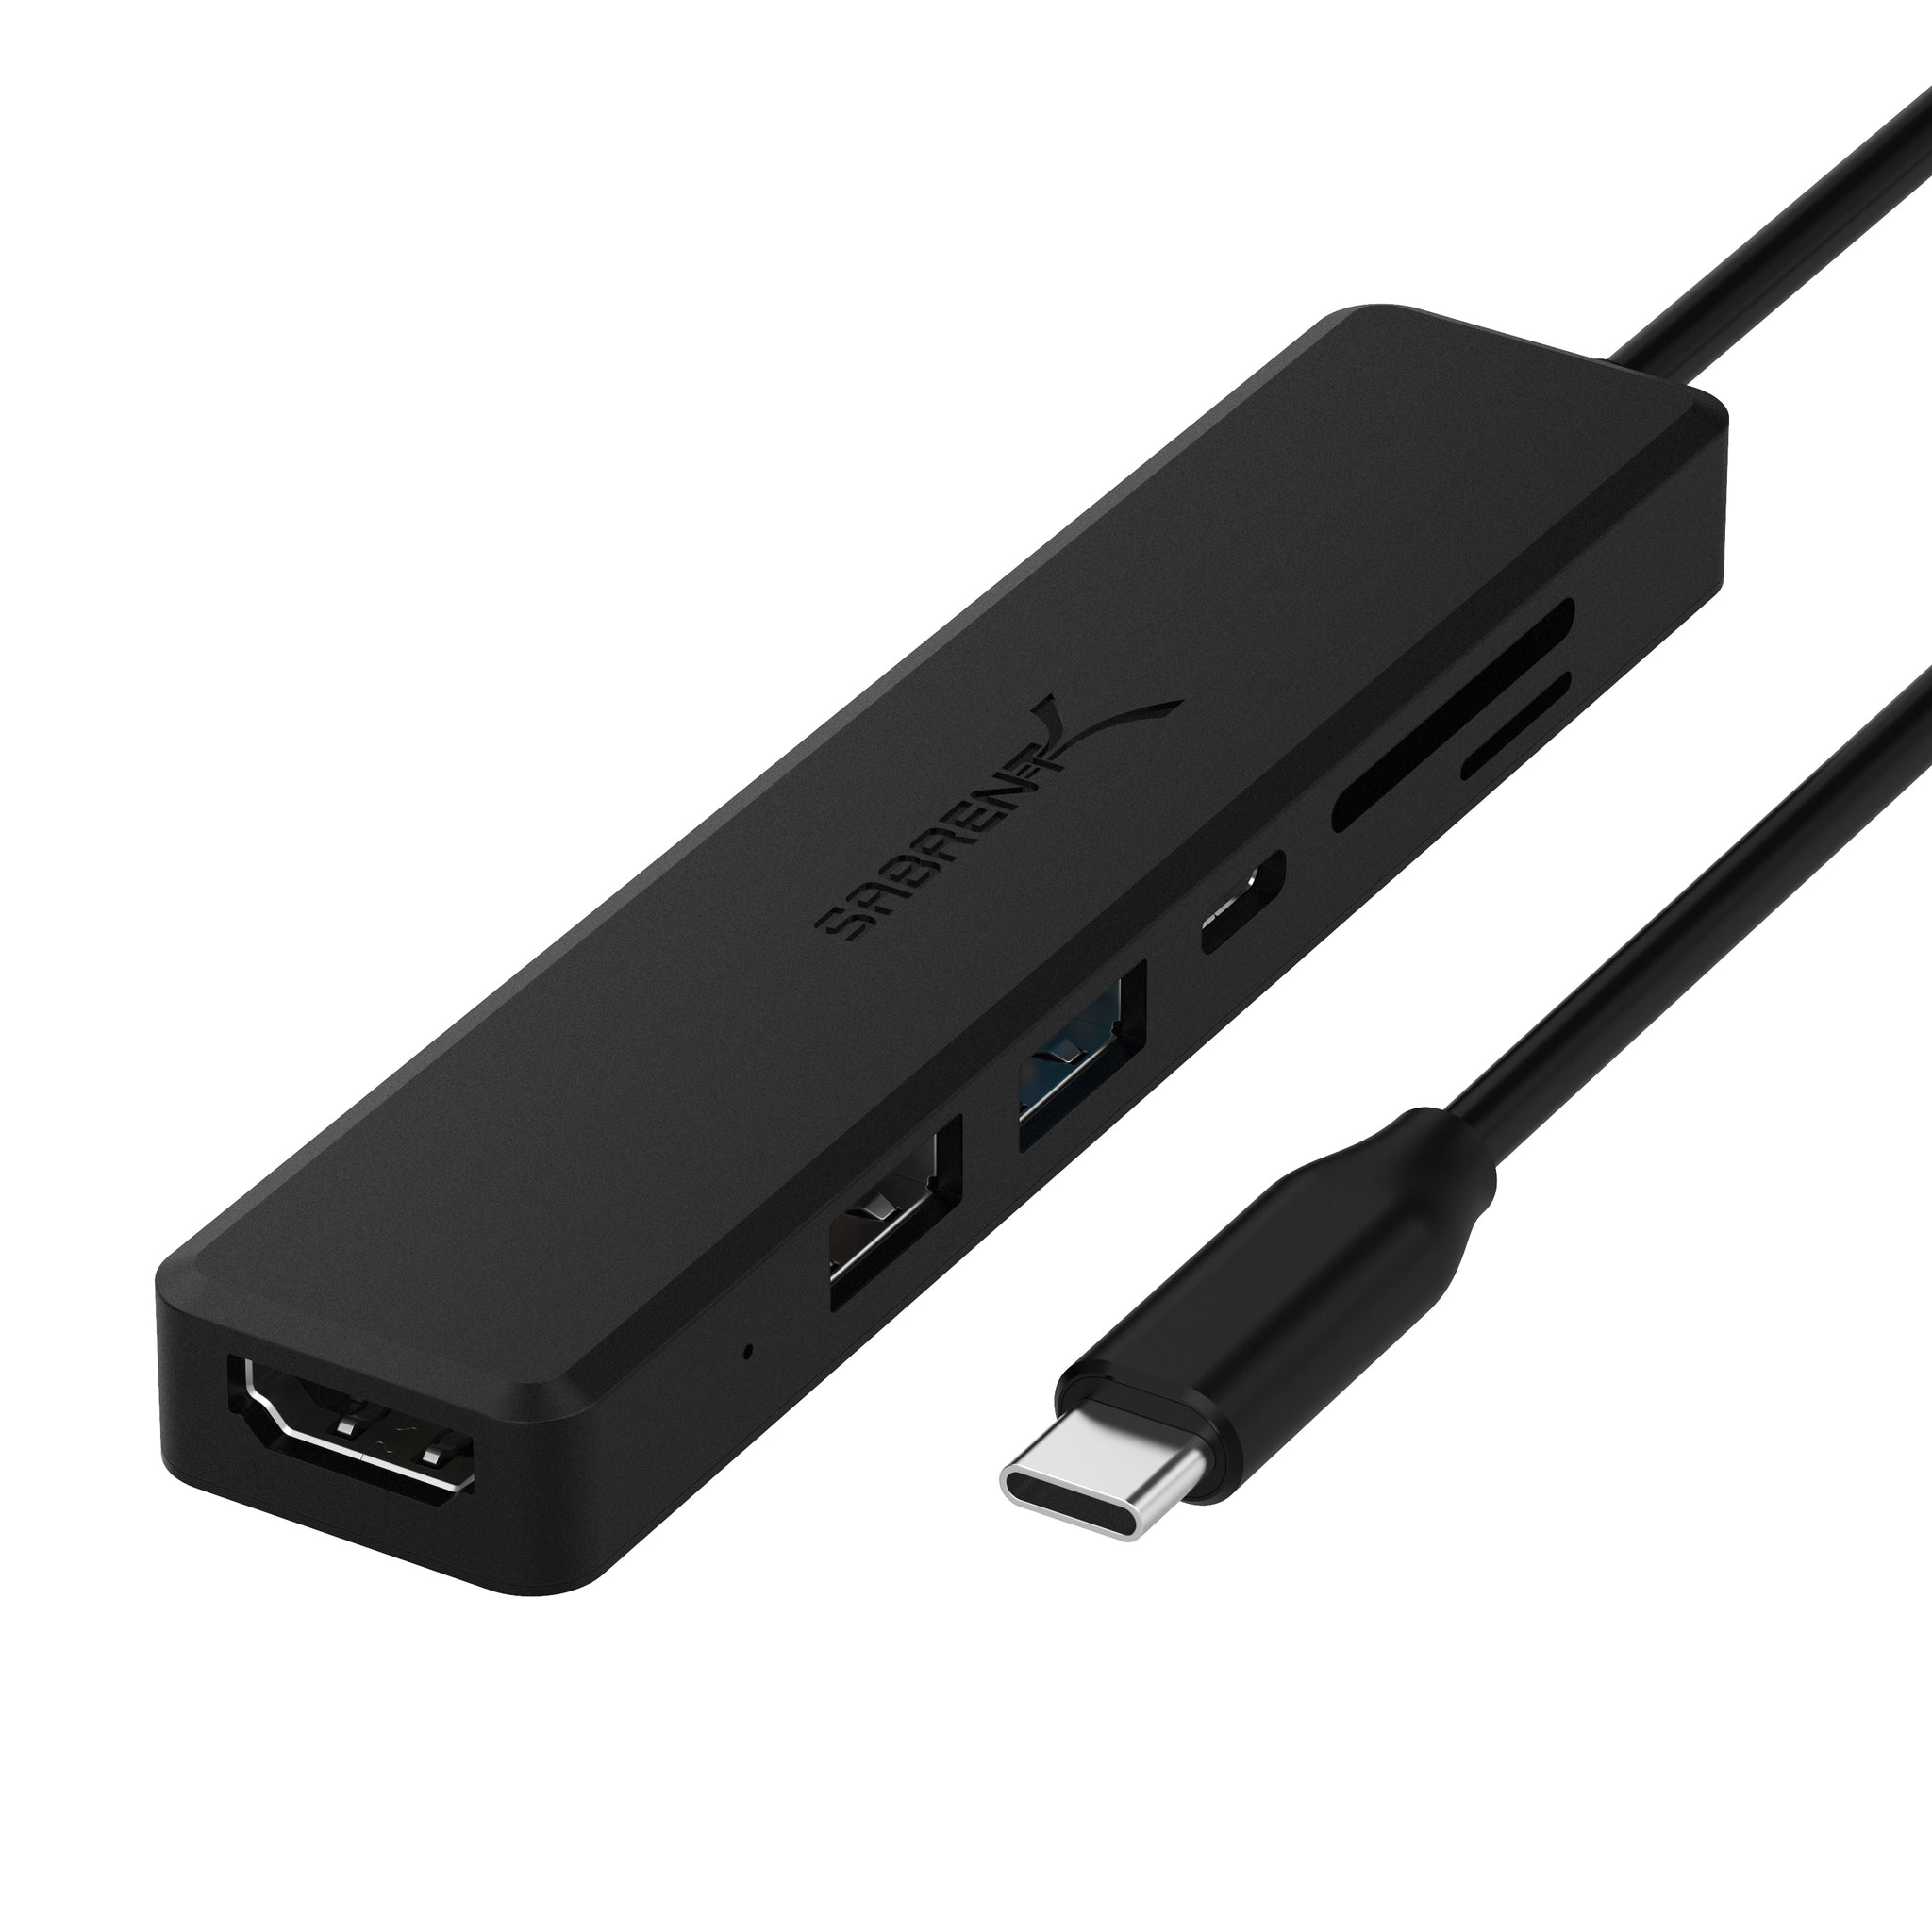 usb c - Why can't I find a USB-C hub with multiple USB-C ports